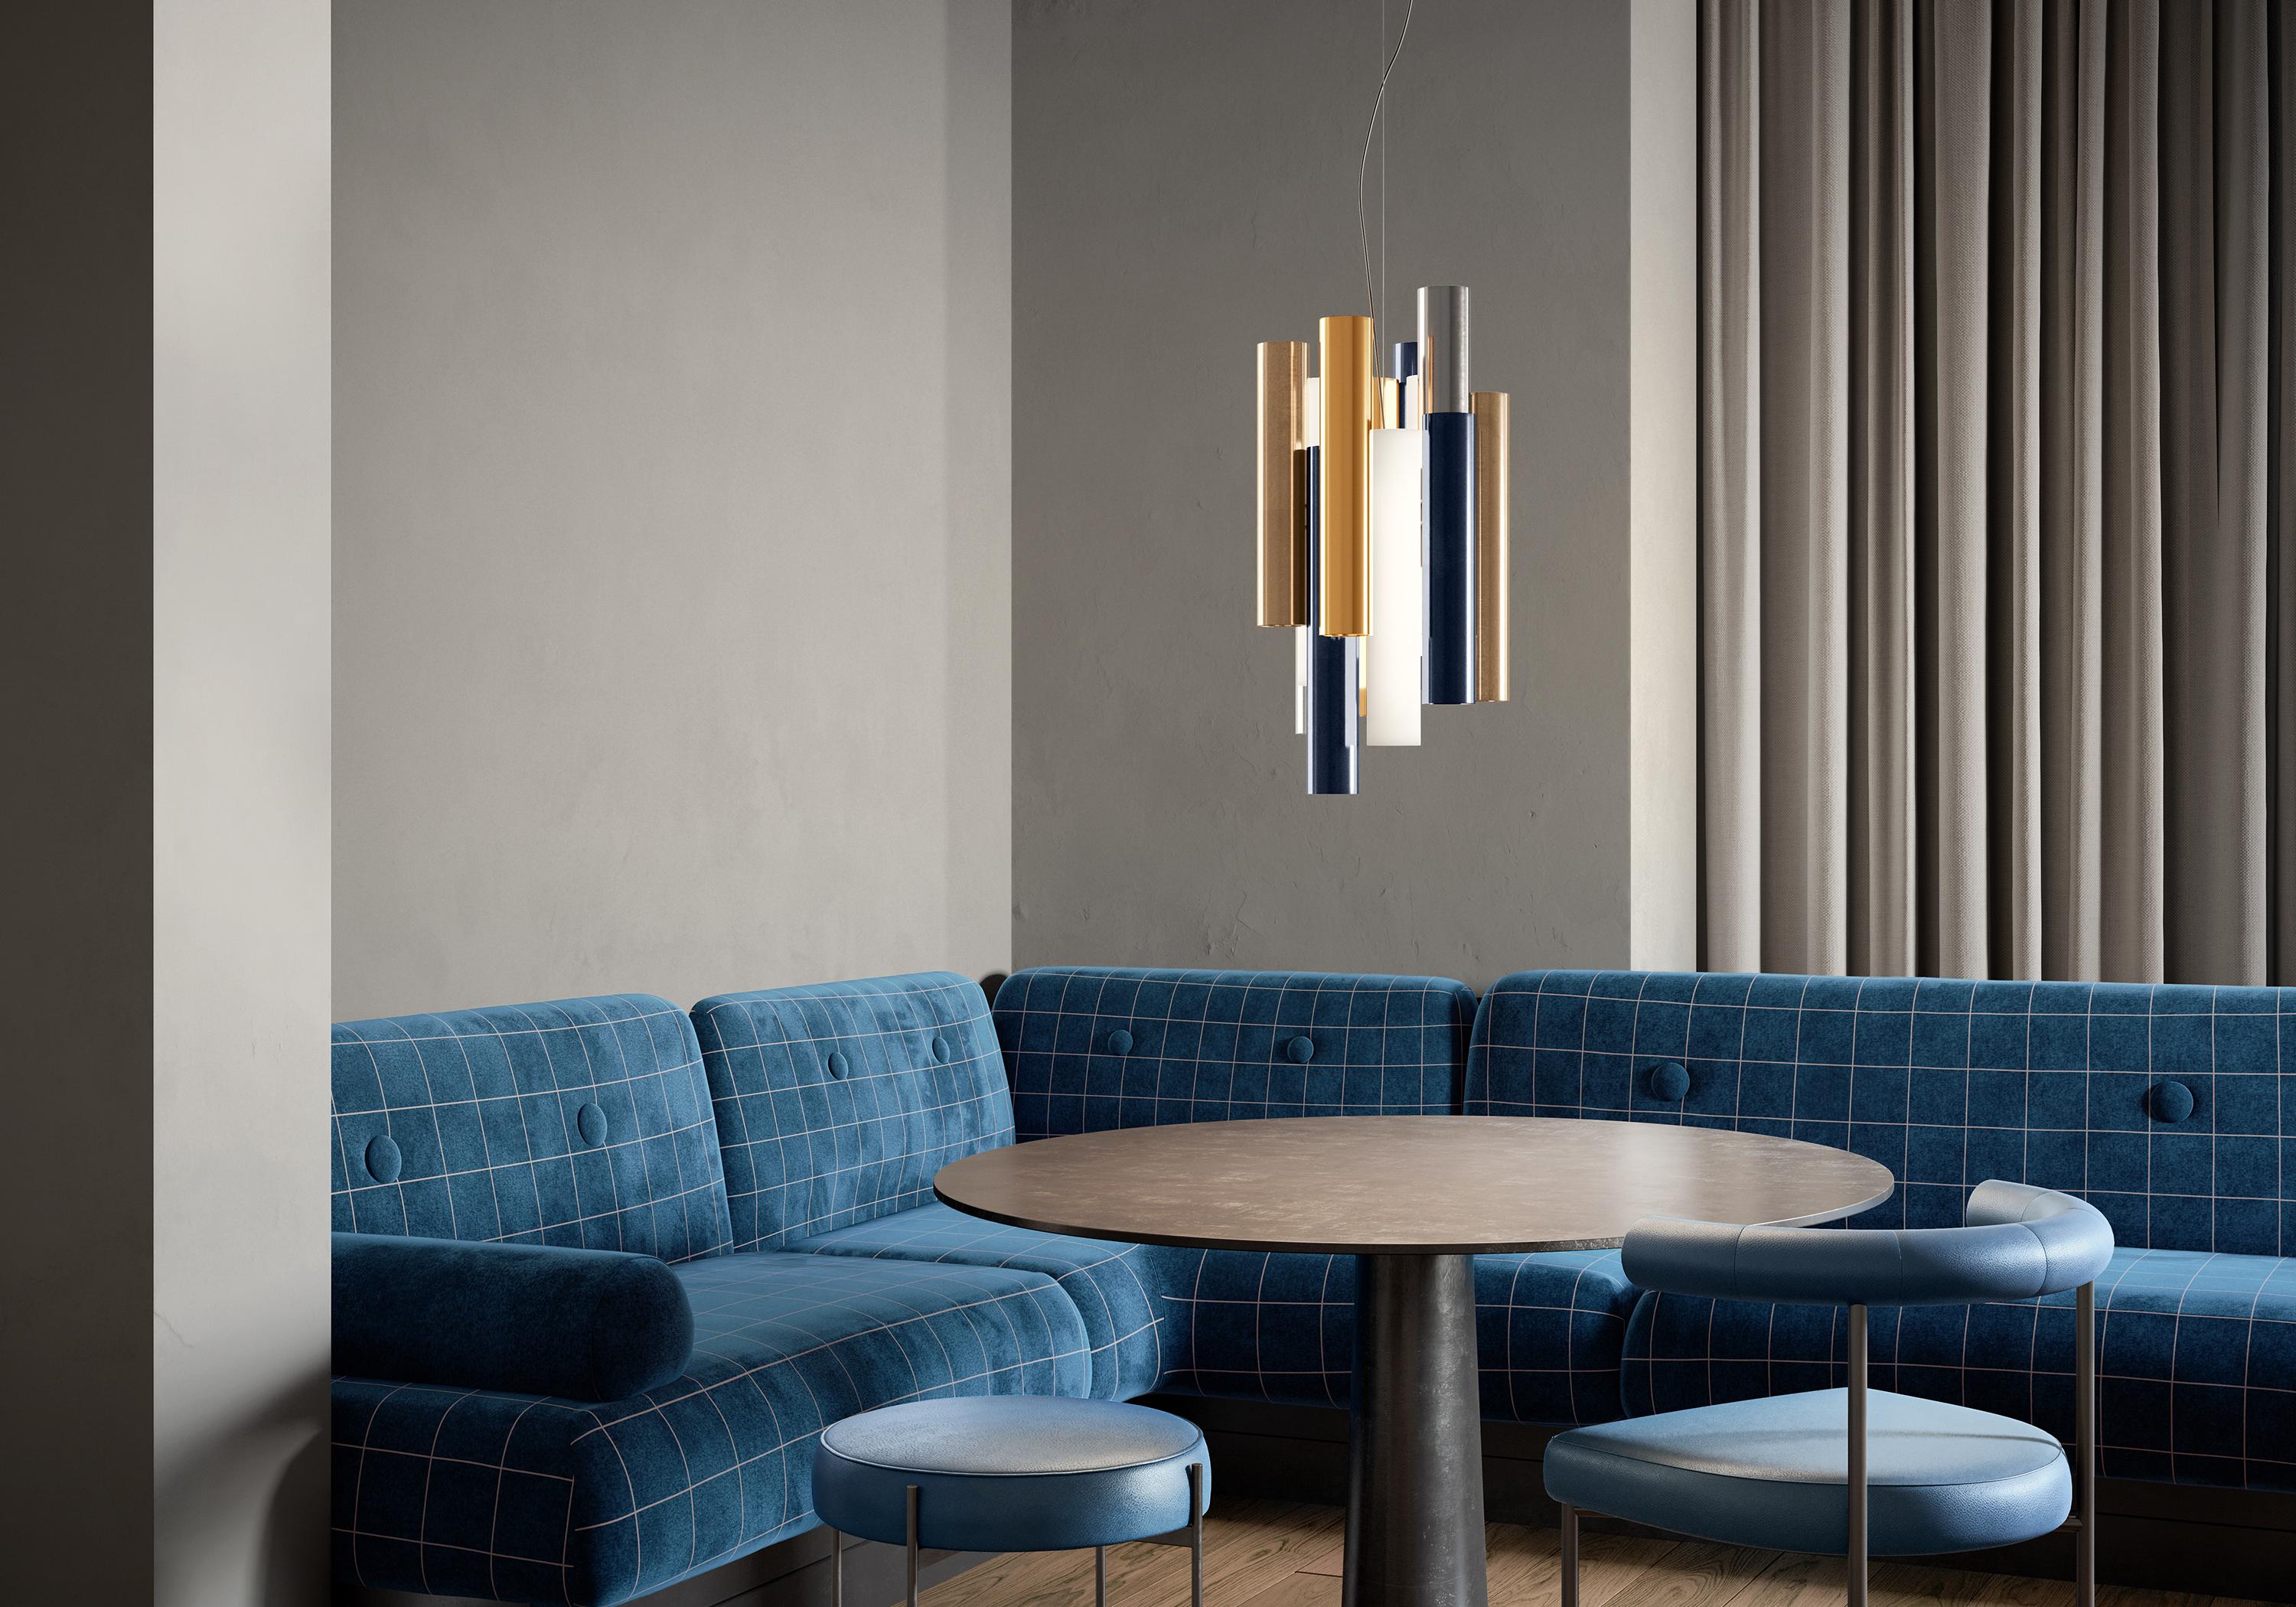 Toot suspension

The atmosphere of the Sixties and contemporary rhythm. Three-dimensional elements arranged at different heights create a play on light and movement. The suspended model combines movement with a dramatic look. An original element